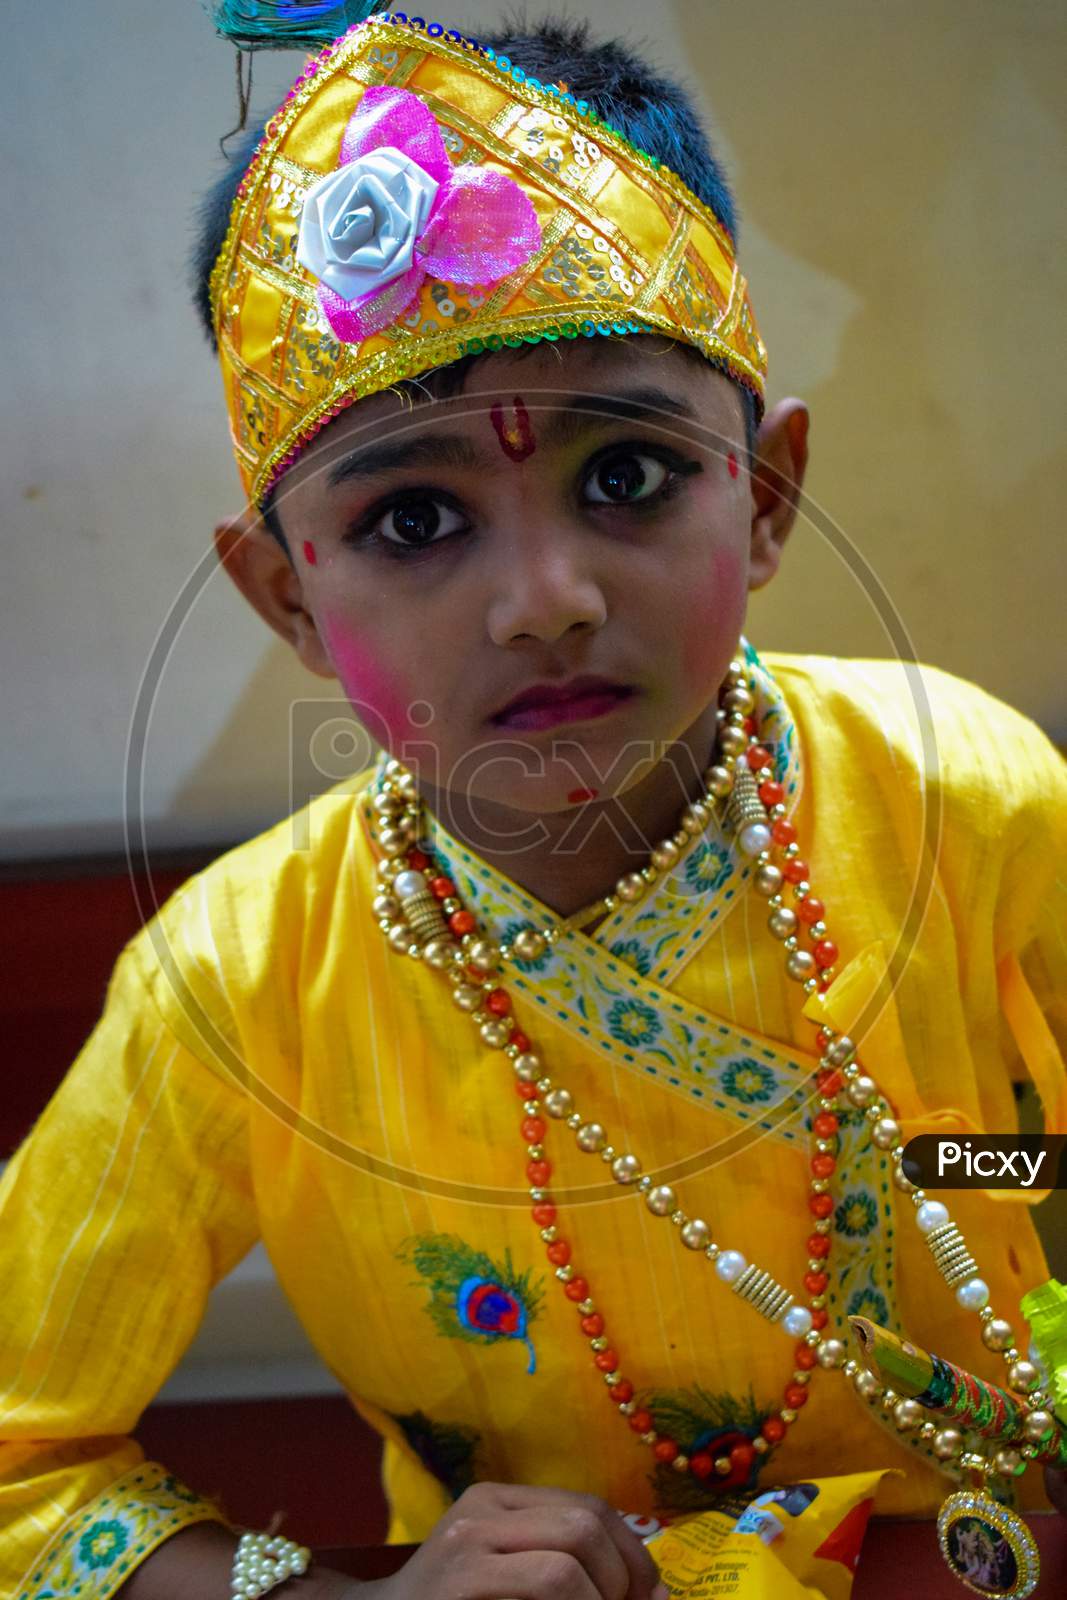 Delhi, India - September 9, 2019 : Cute Indian Kids dressed up as little Lord Krishna Radha on the occasion of Krishna Janmastami Festival in Delhi India